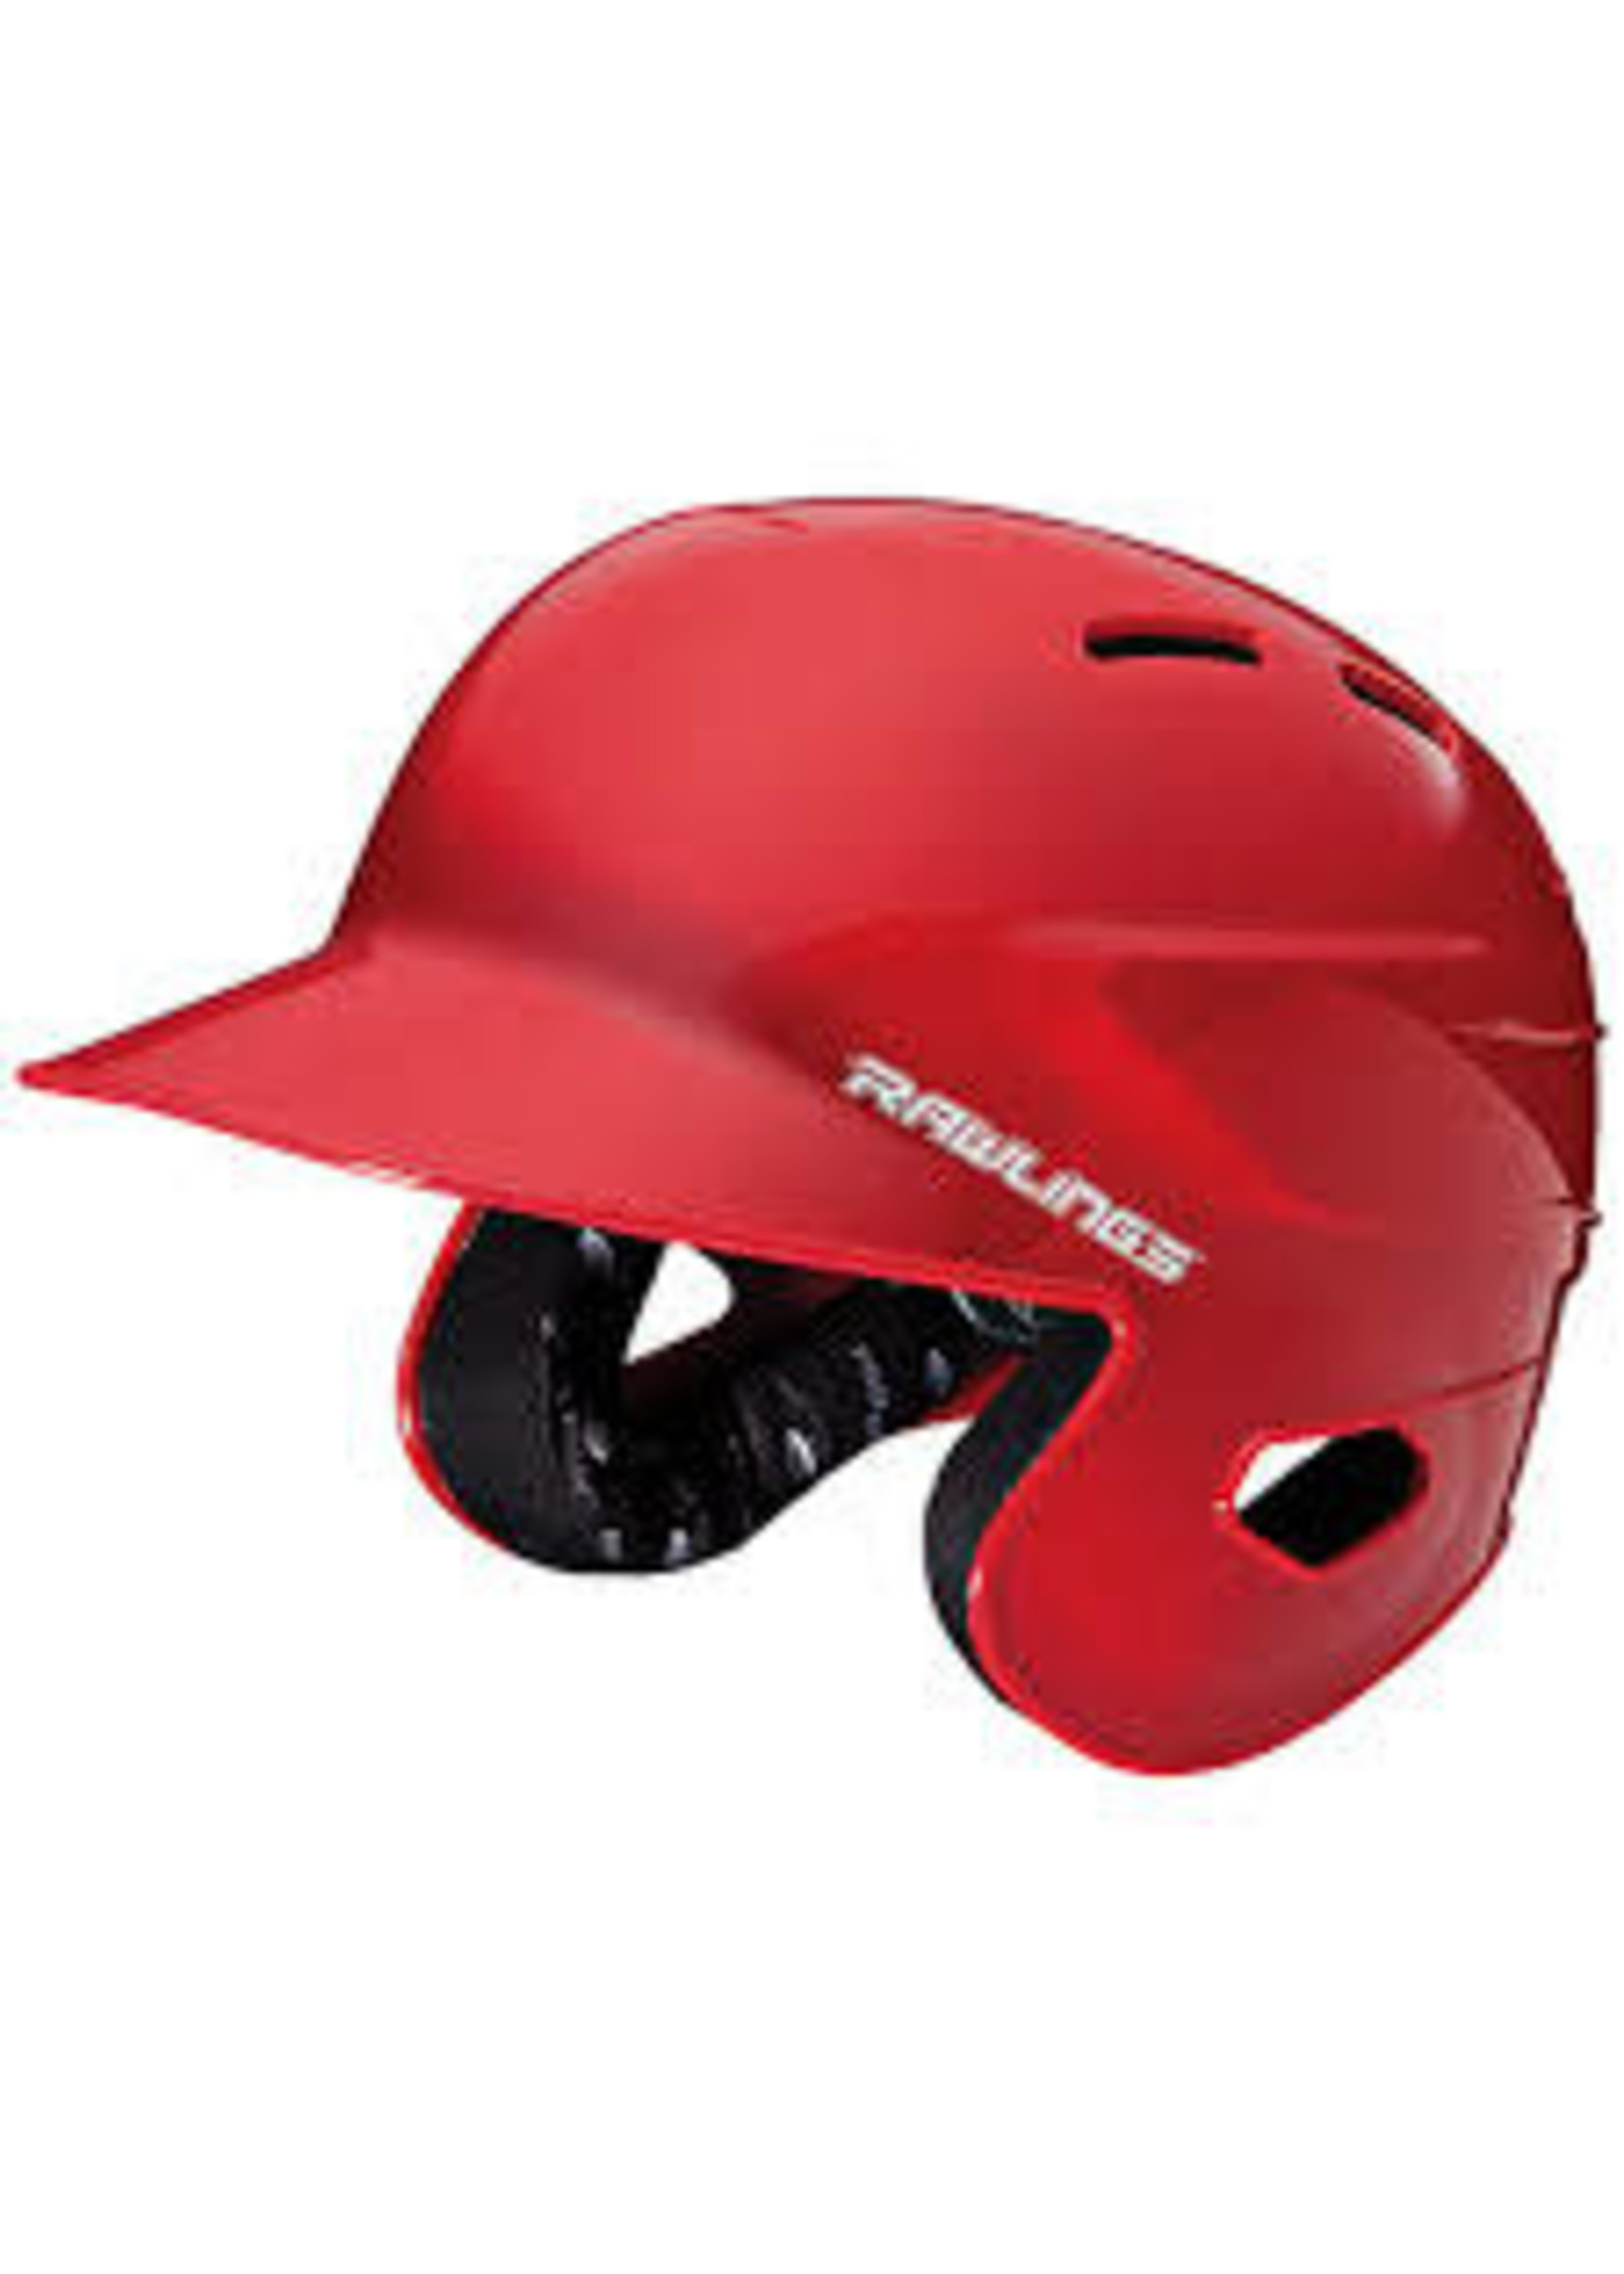 RAWLINGS RAWLINGS COOLFLO BATTING HELMET RED ONE SIZE FITS (6 1/2" - 7 1/2")